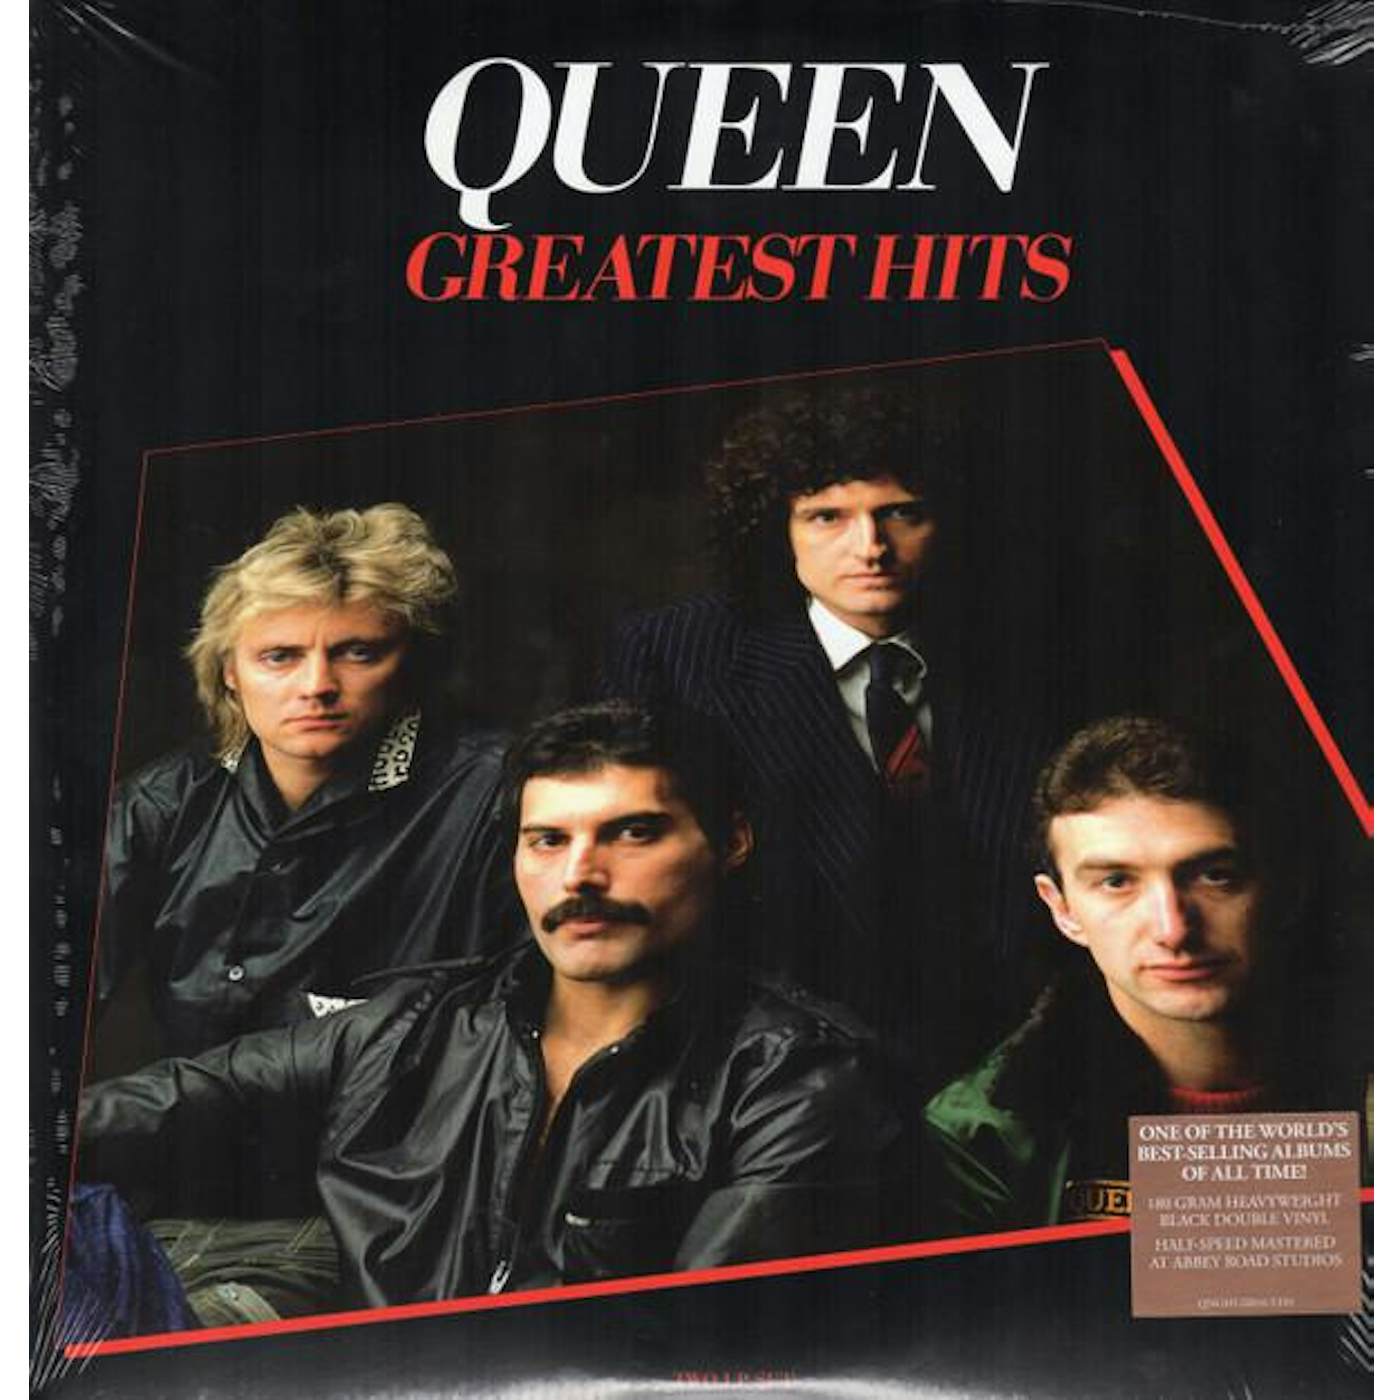 Queen GREATEST HITS 1 (180G/DL CARD/2LP) Vinyl Record